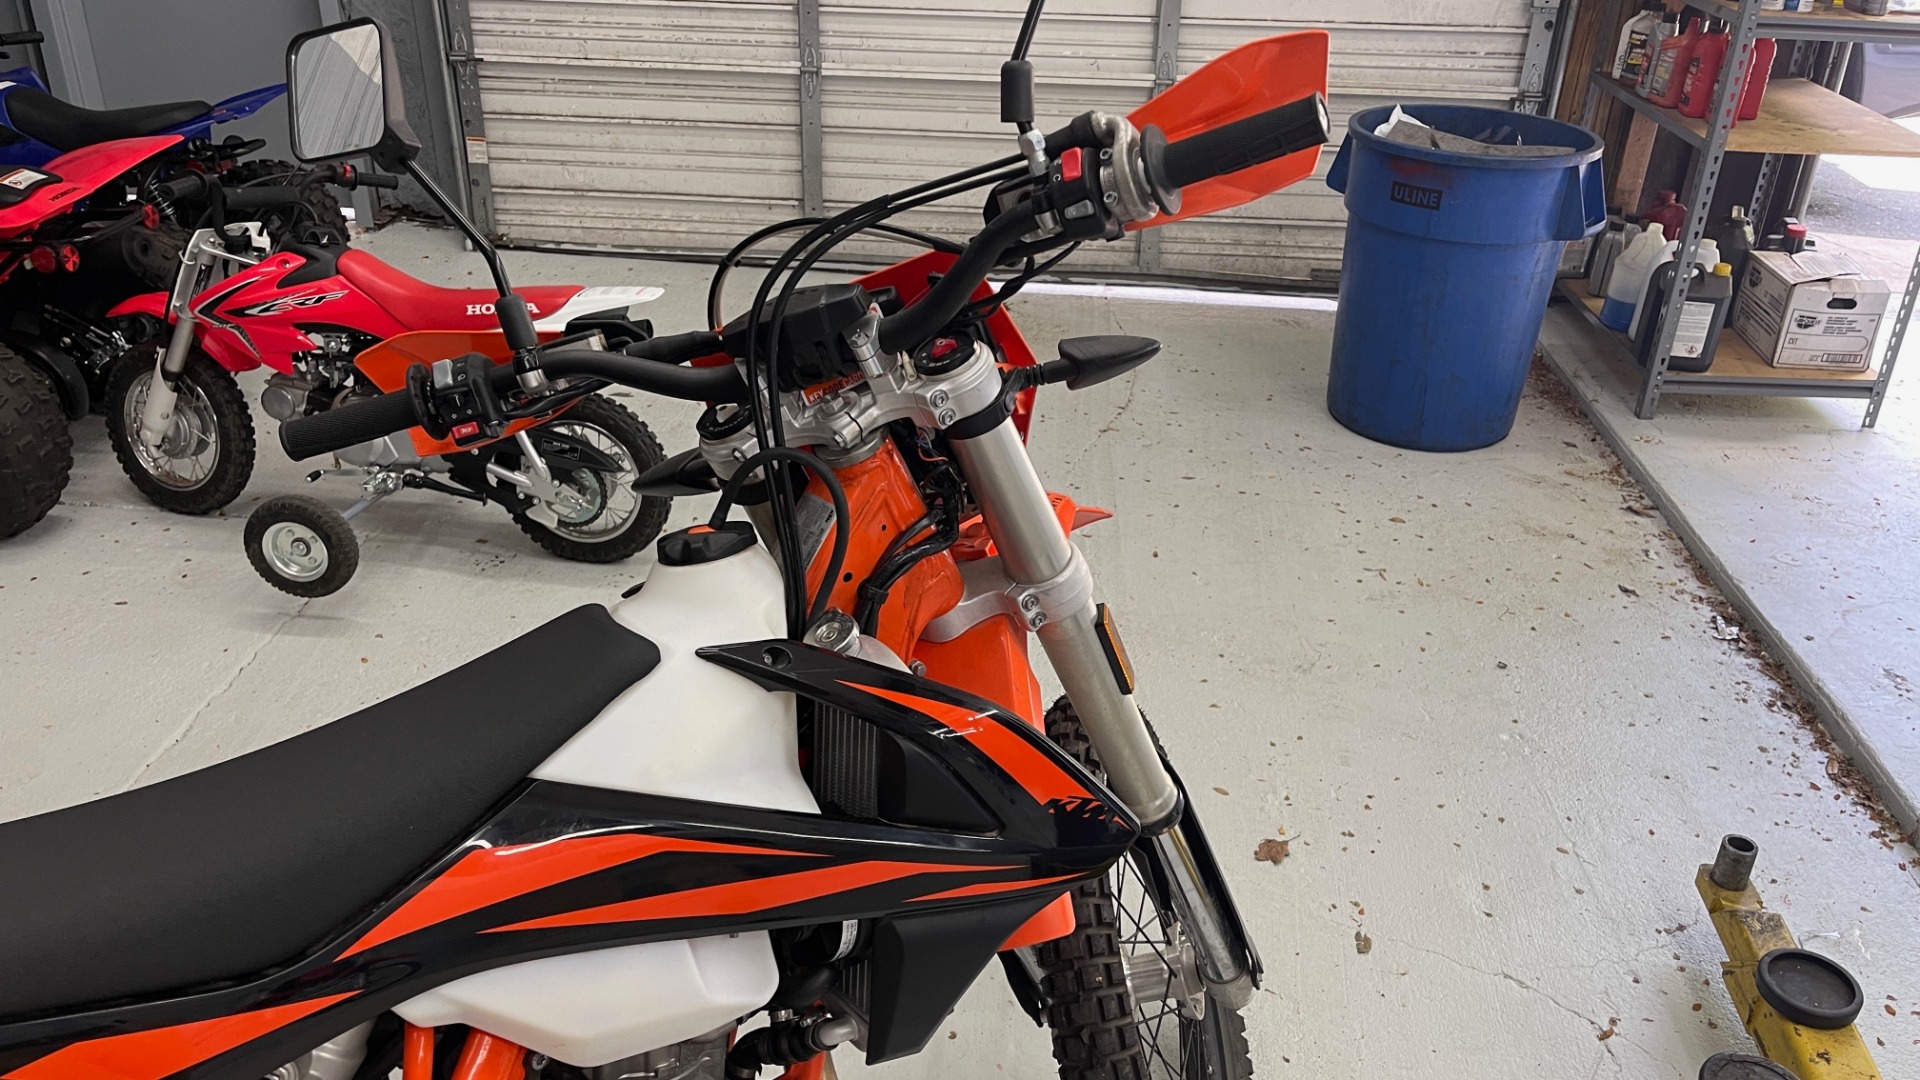 Used 2019 KTM 500 EXC-F DUAL PURPOSE DIRT BIKE / 4-STROKE / EFI / ELECTRIC START / 6-SPEED for sale $11,000 at Formula Imports in Charlotte NC 28227 5